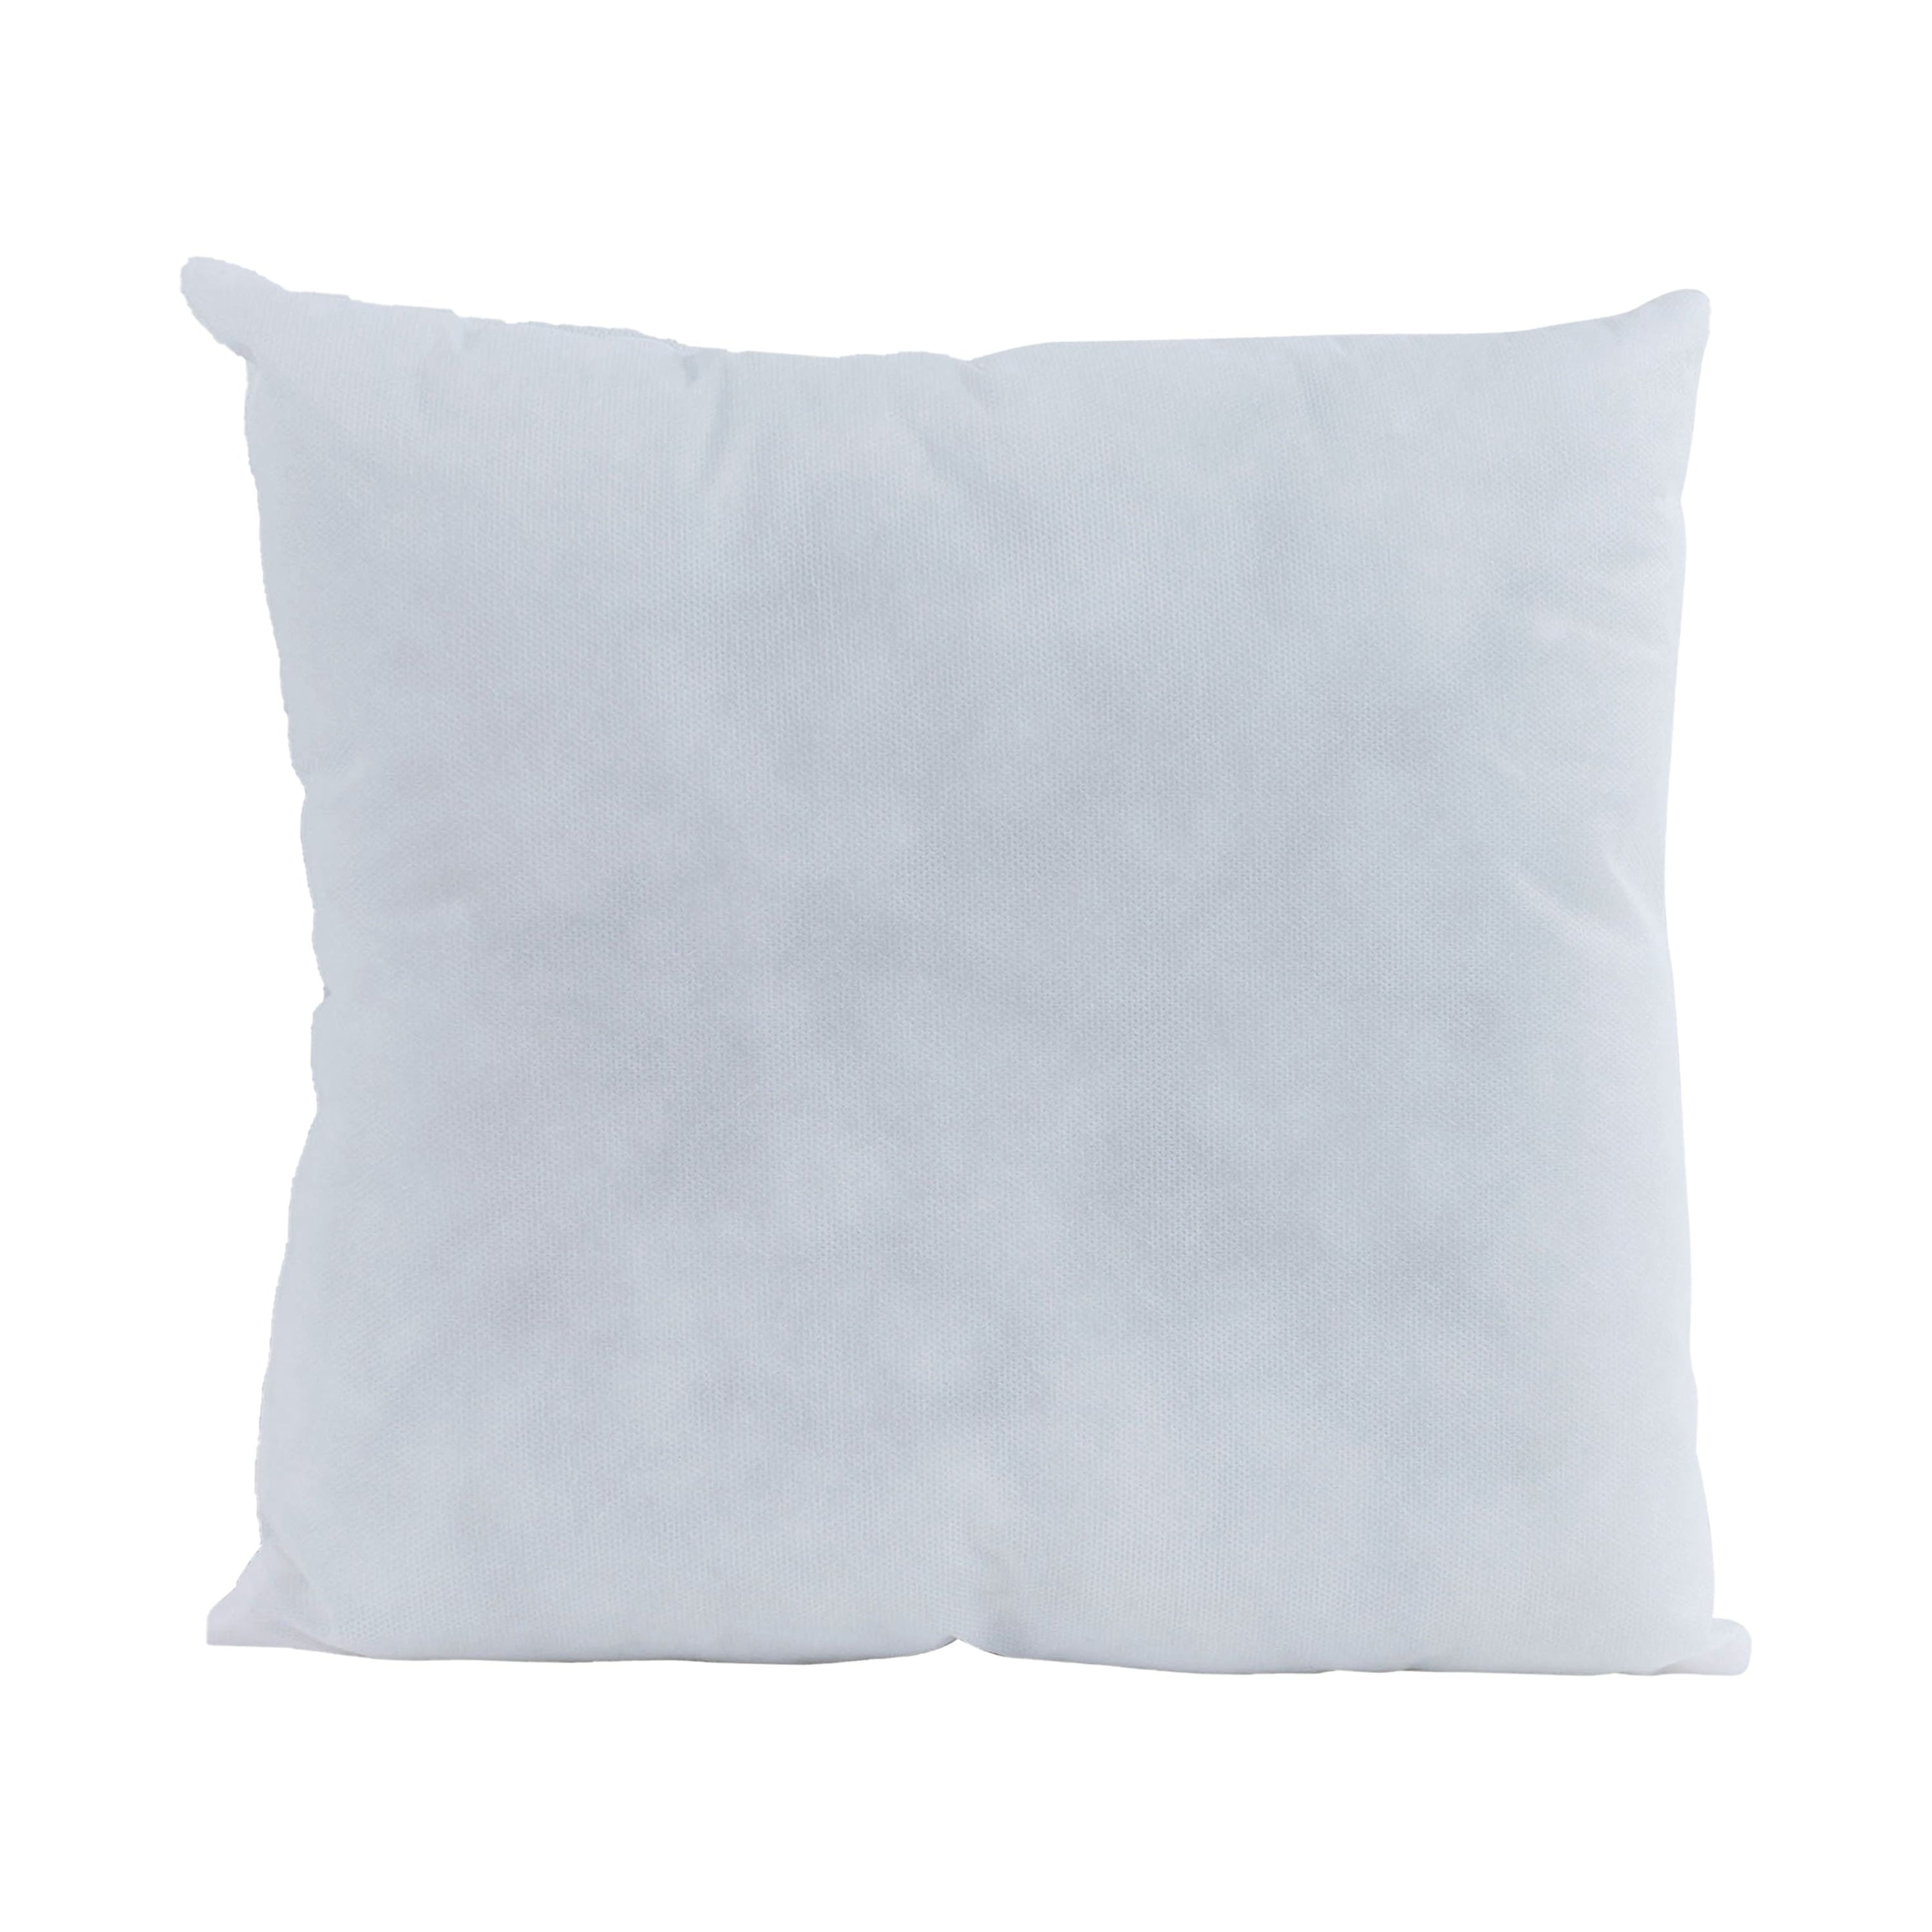 FavriQ 18 x 18 Throw Pillow Inserts with 100% cotton cover Square